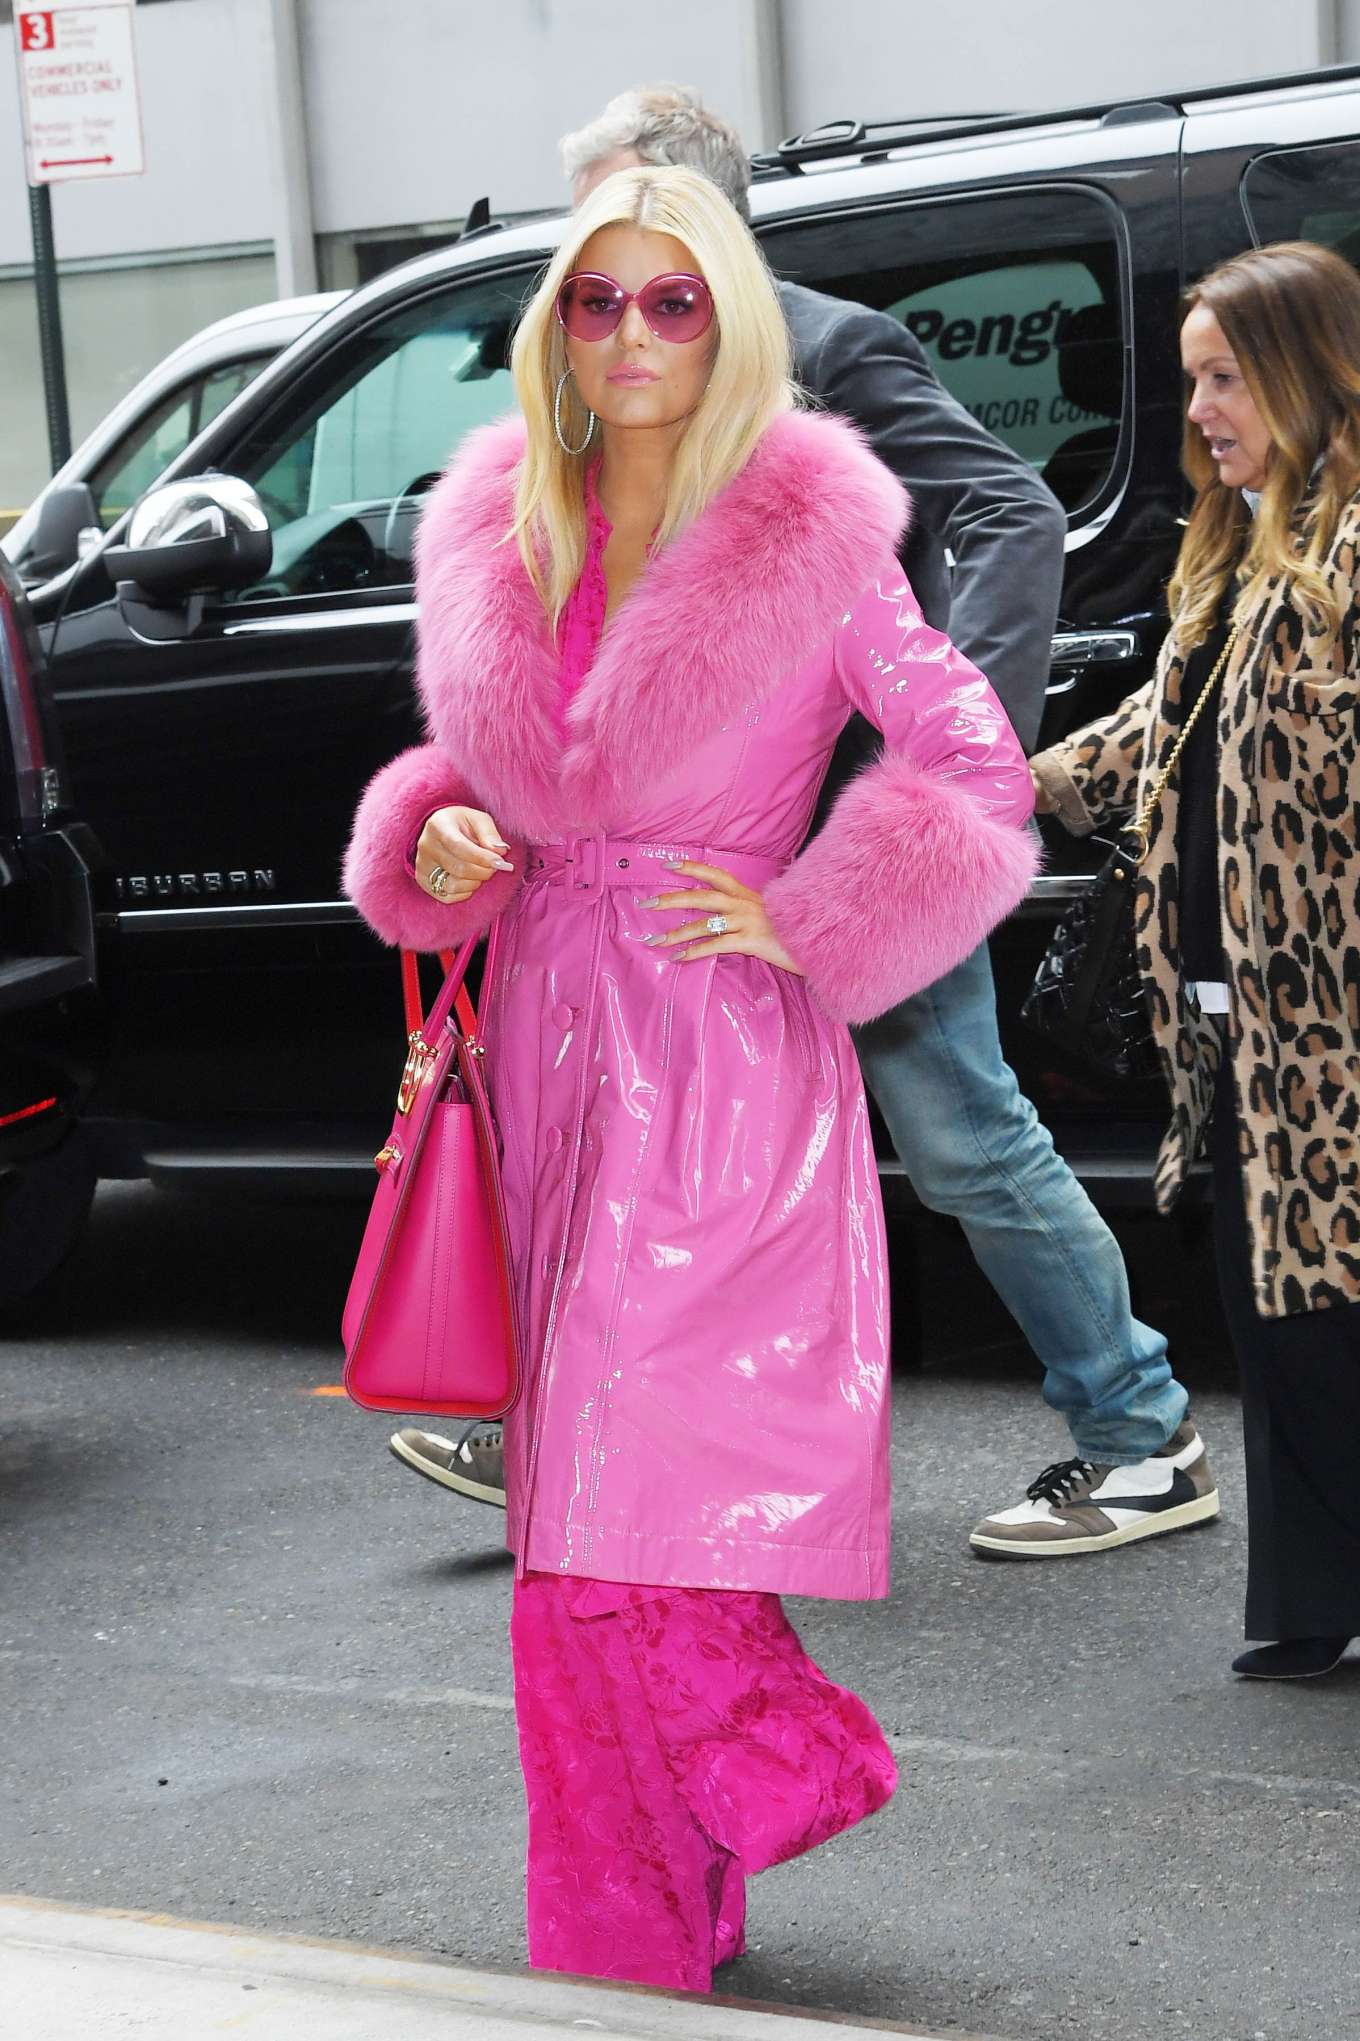 Jessica Simpson in Pink Outfit at BuzzFeed in New York-12 | GotCeleb